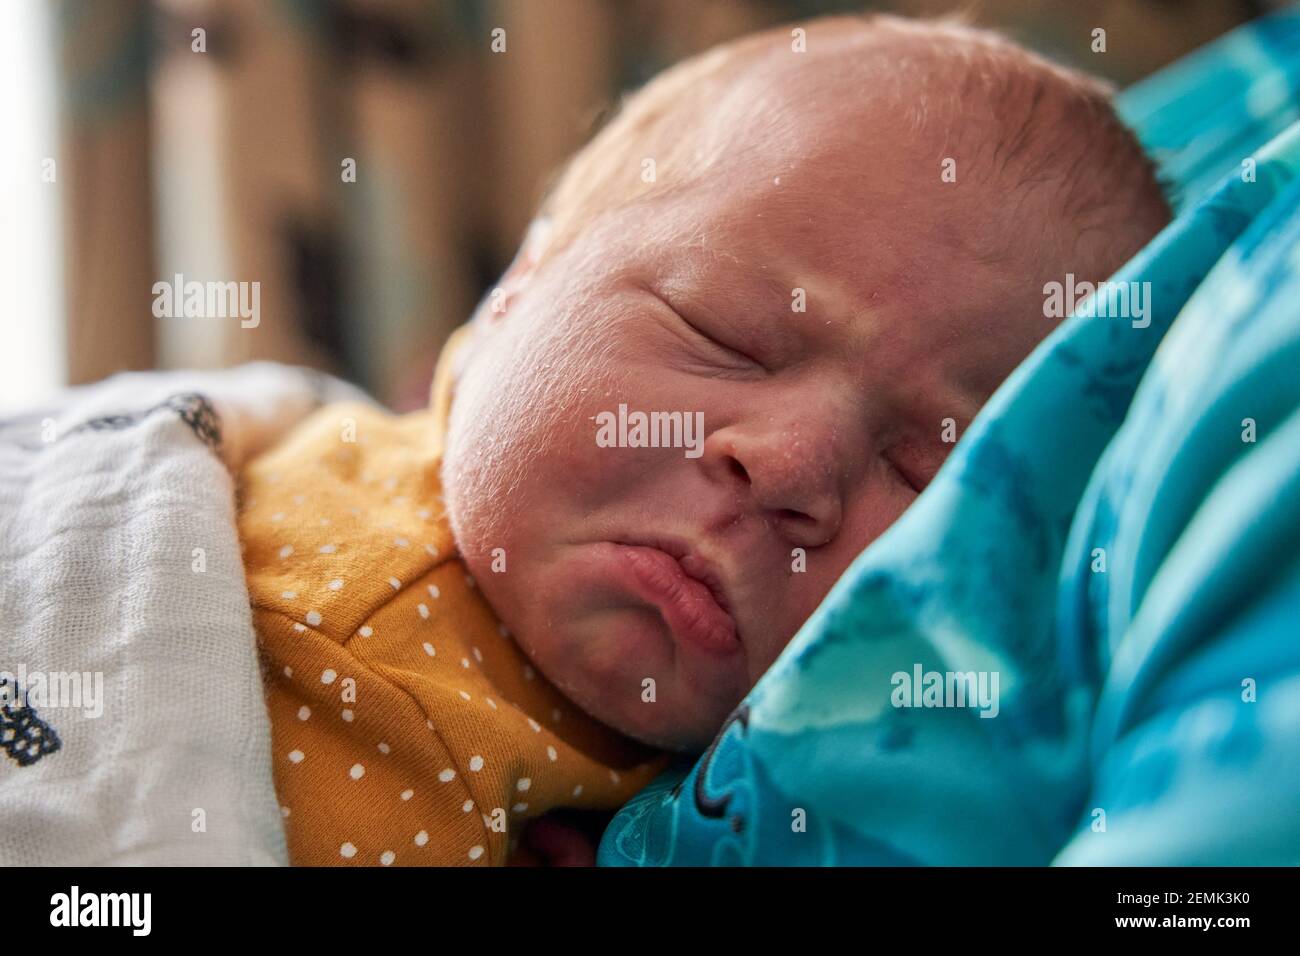 The facial expressions of a new born baby girl Stock Photo